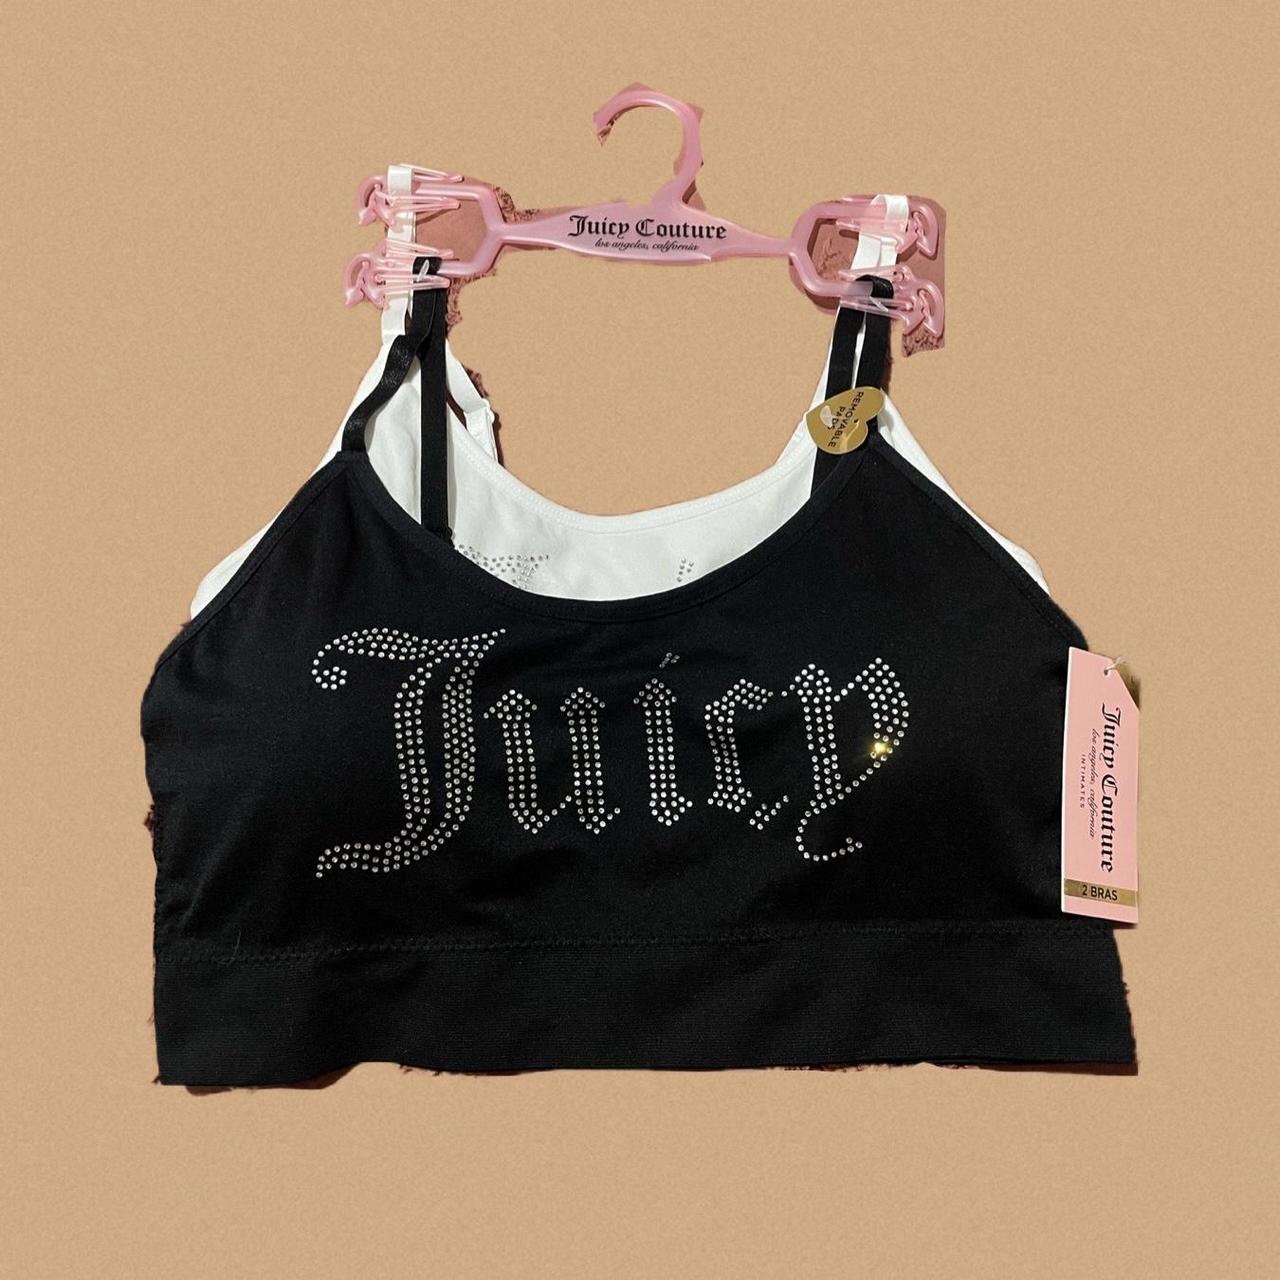 Juicy Couture 2P Bling Out Bralette Set Brand New - Depop